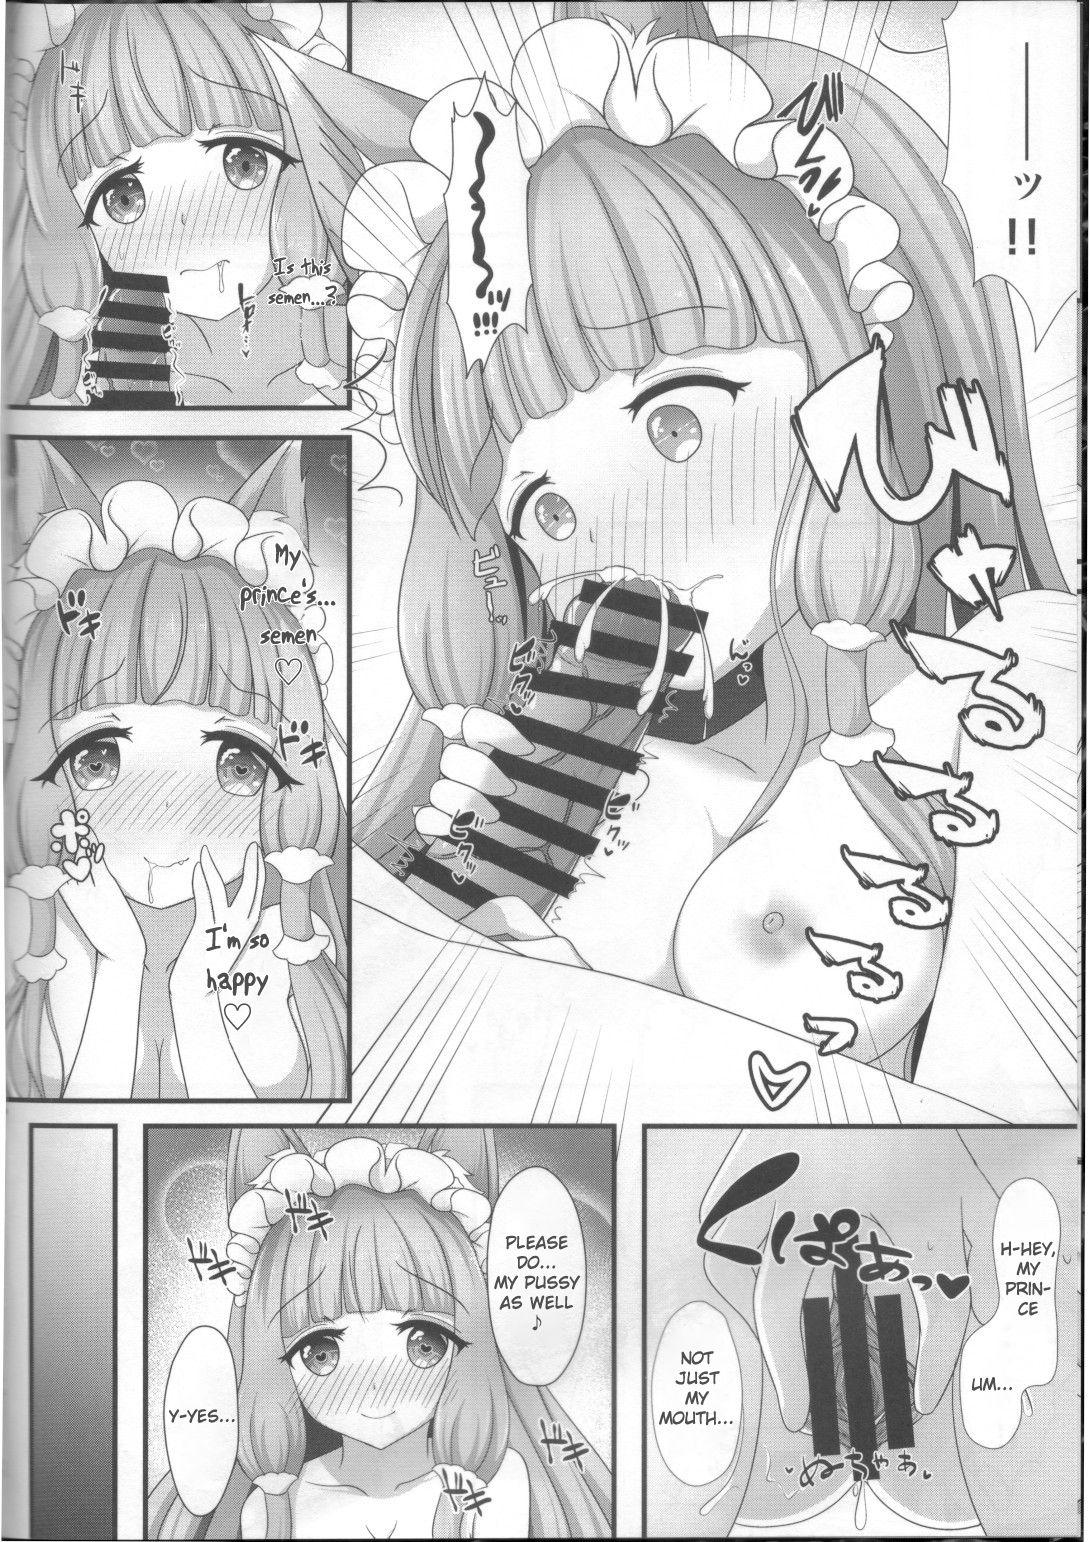 Pussy Lick Maho Hime Connect! - Princess connect Ano - Page 11